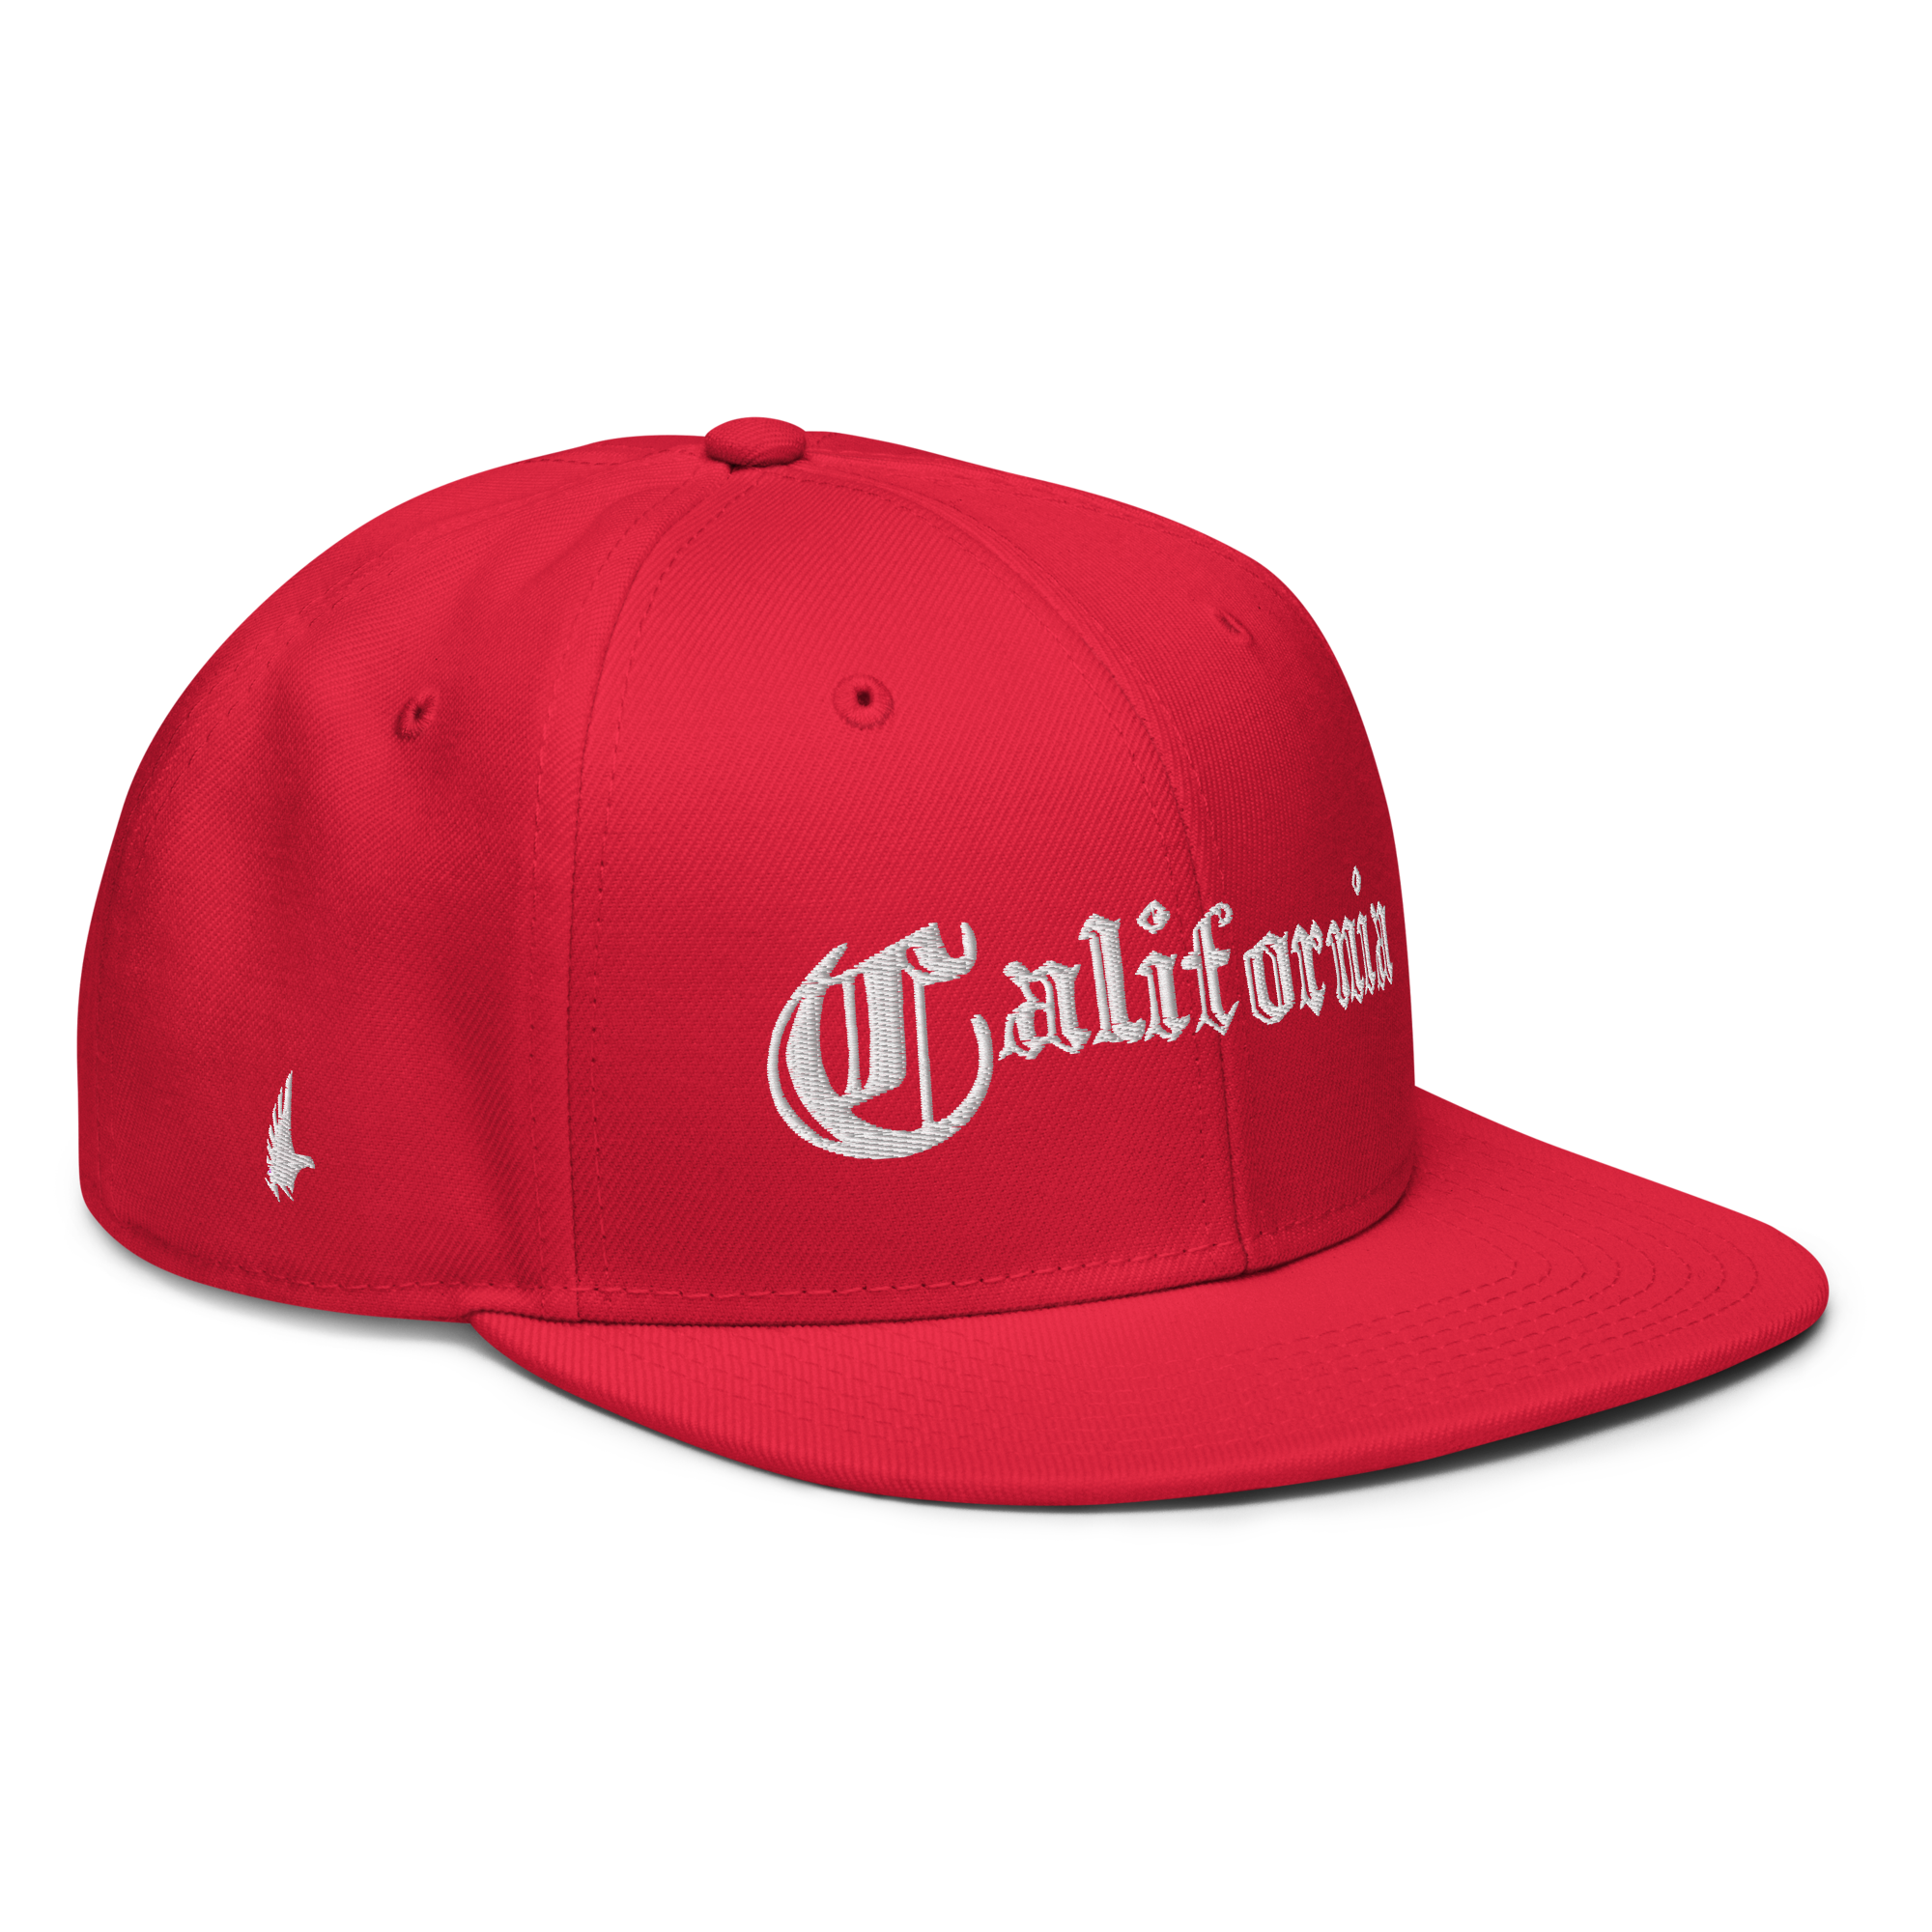 California Snapback Hat - Red OS - Loyalty Vibes